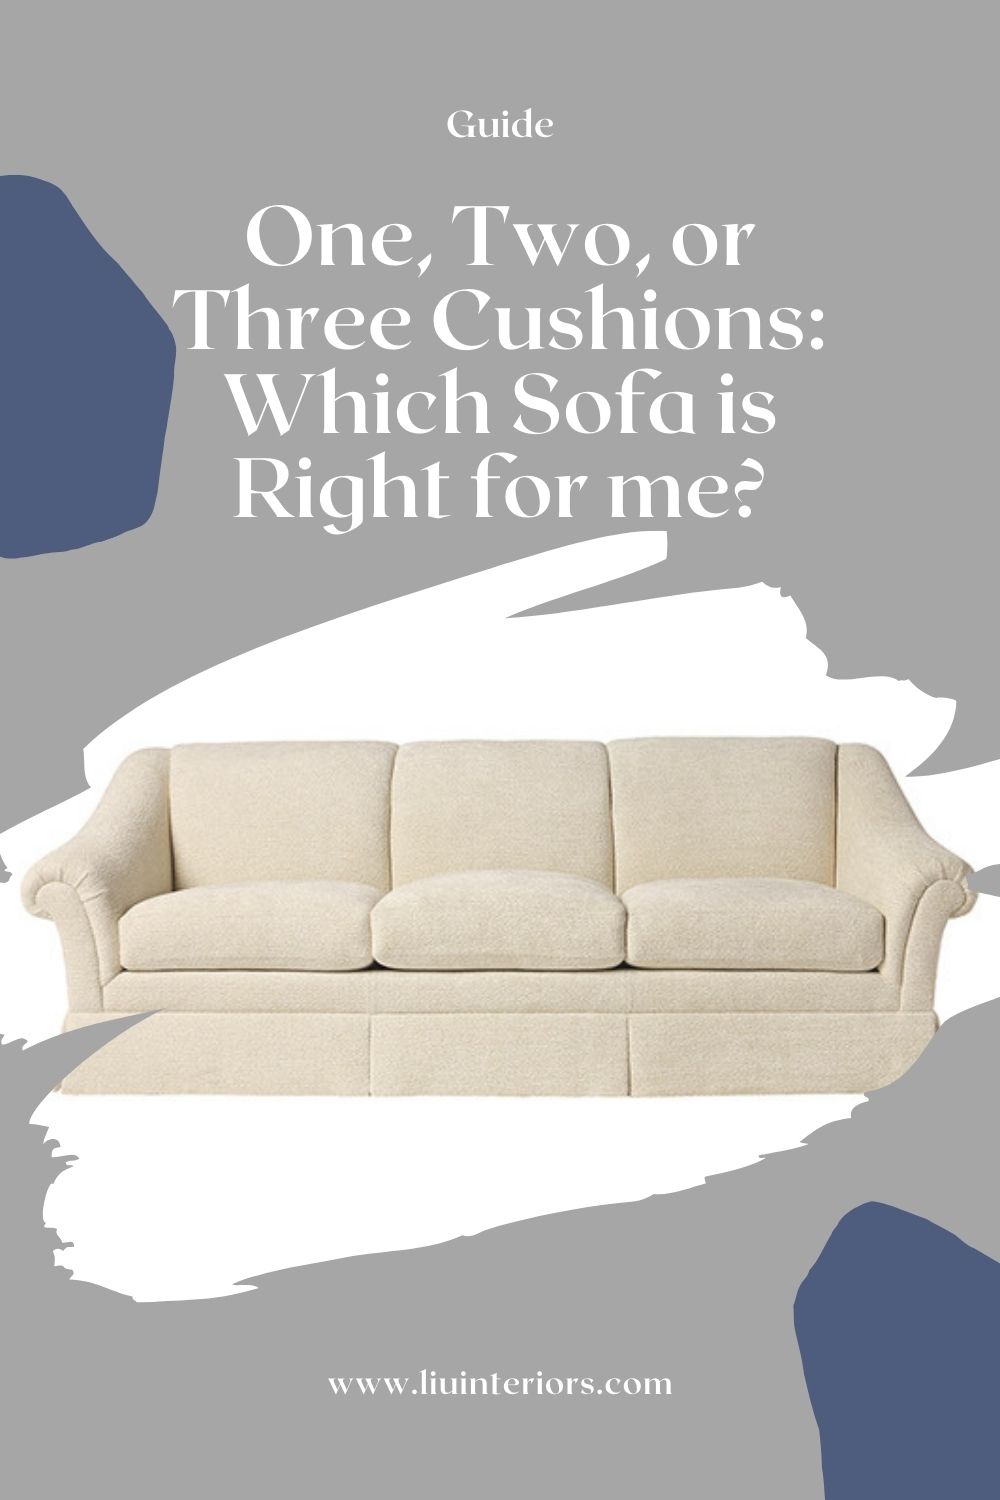 How Many Cushions Should You Have on Your Sofa? –